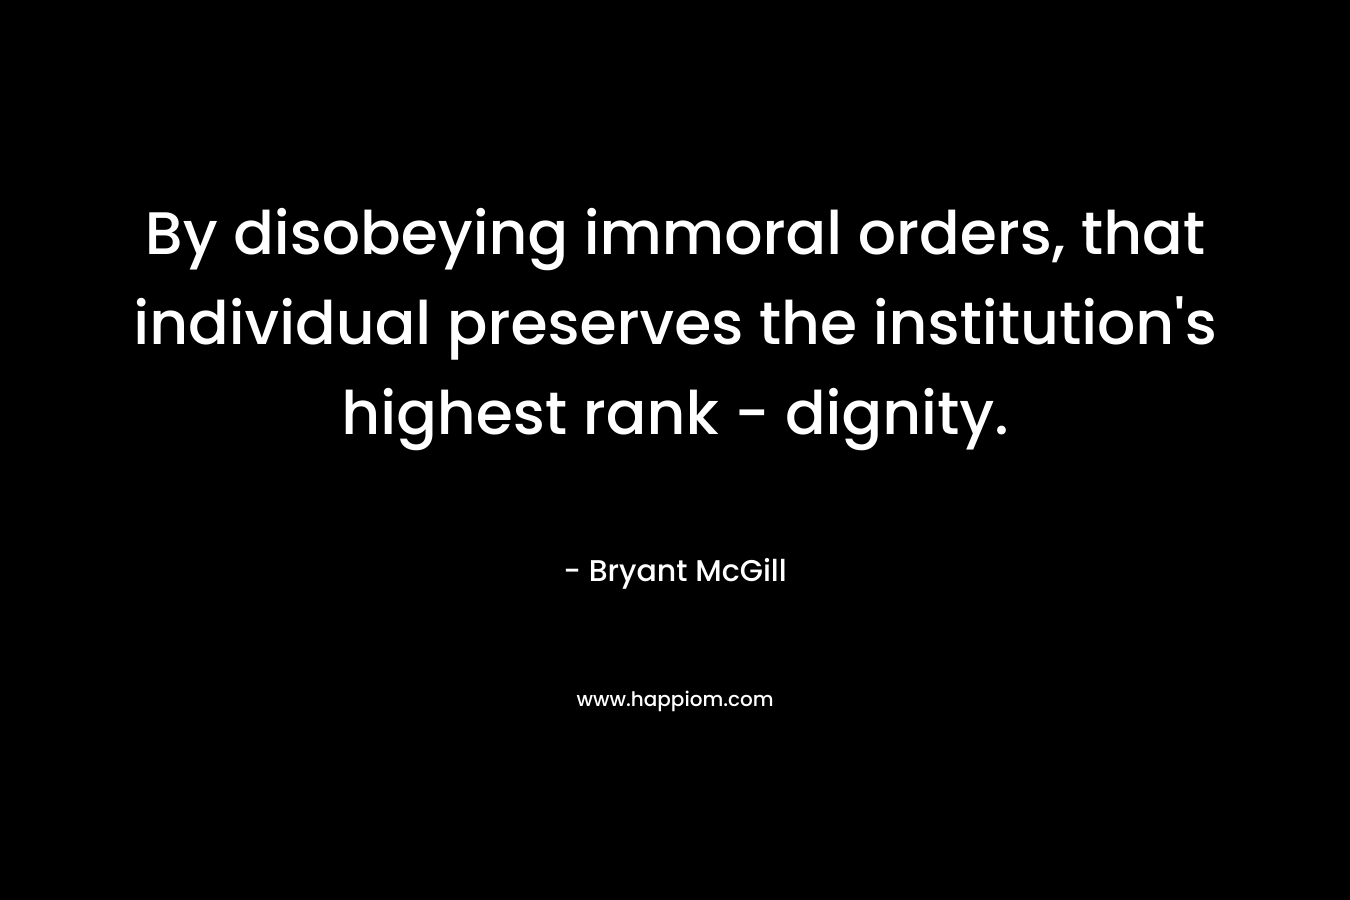 By disobeying immoral orders, that individual preserves the institution’s highest rank – dignity. – Bryant McGill